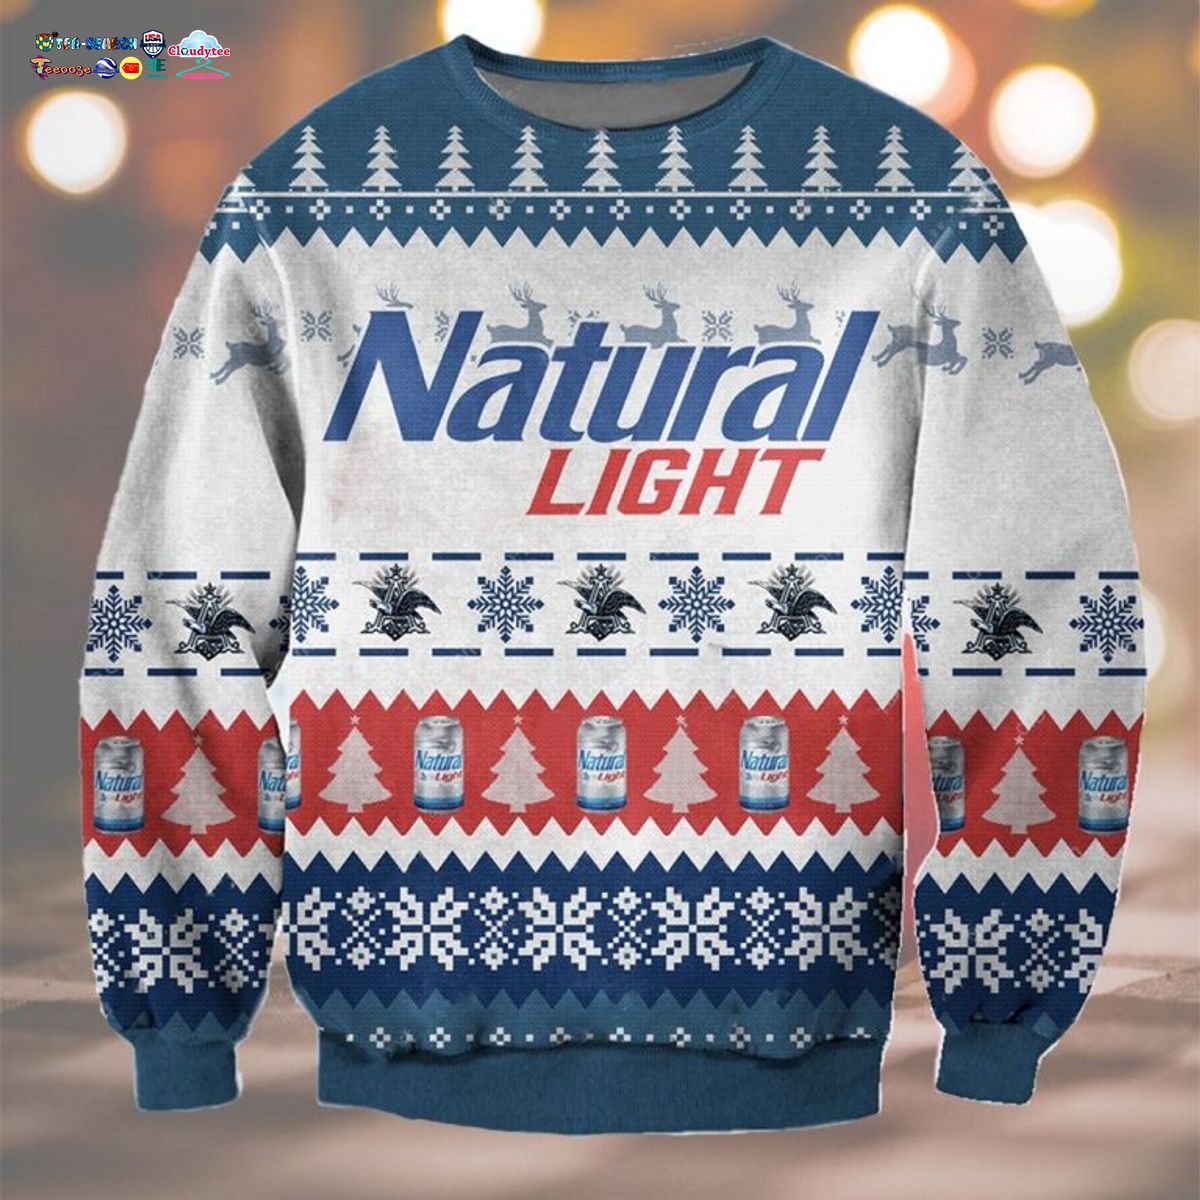 natural-light-ver-2-ugly-christmas-sweater-1-GdWgw.jpg